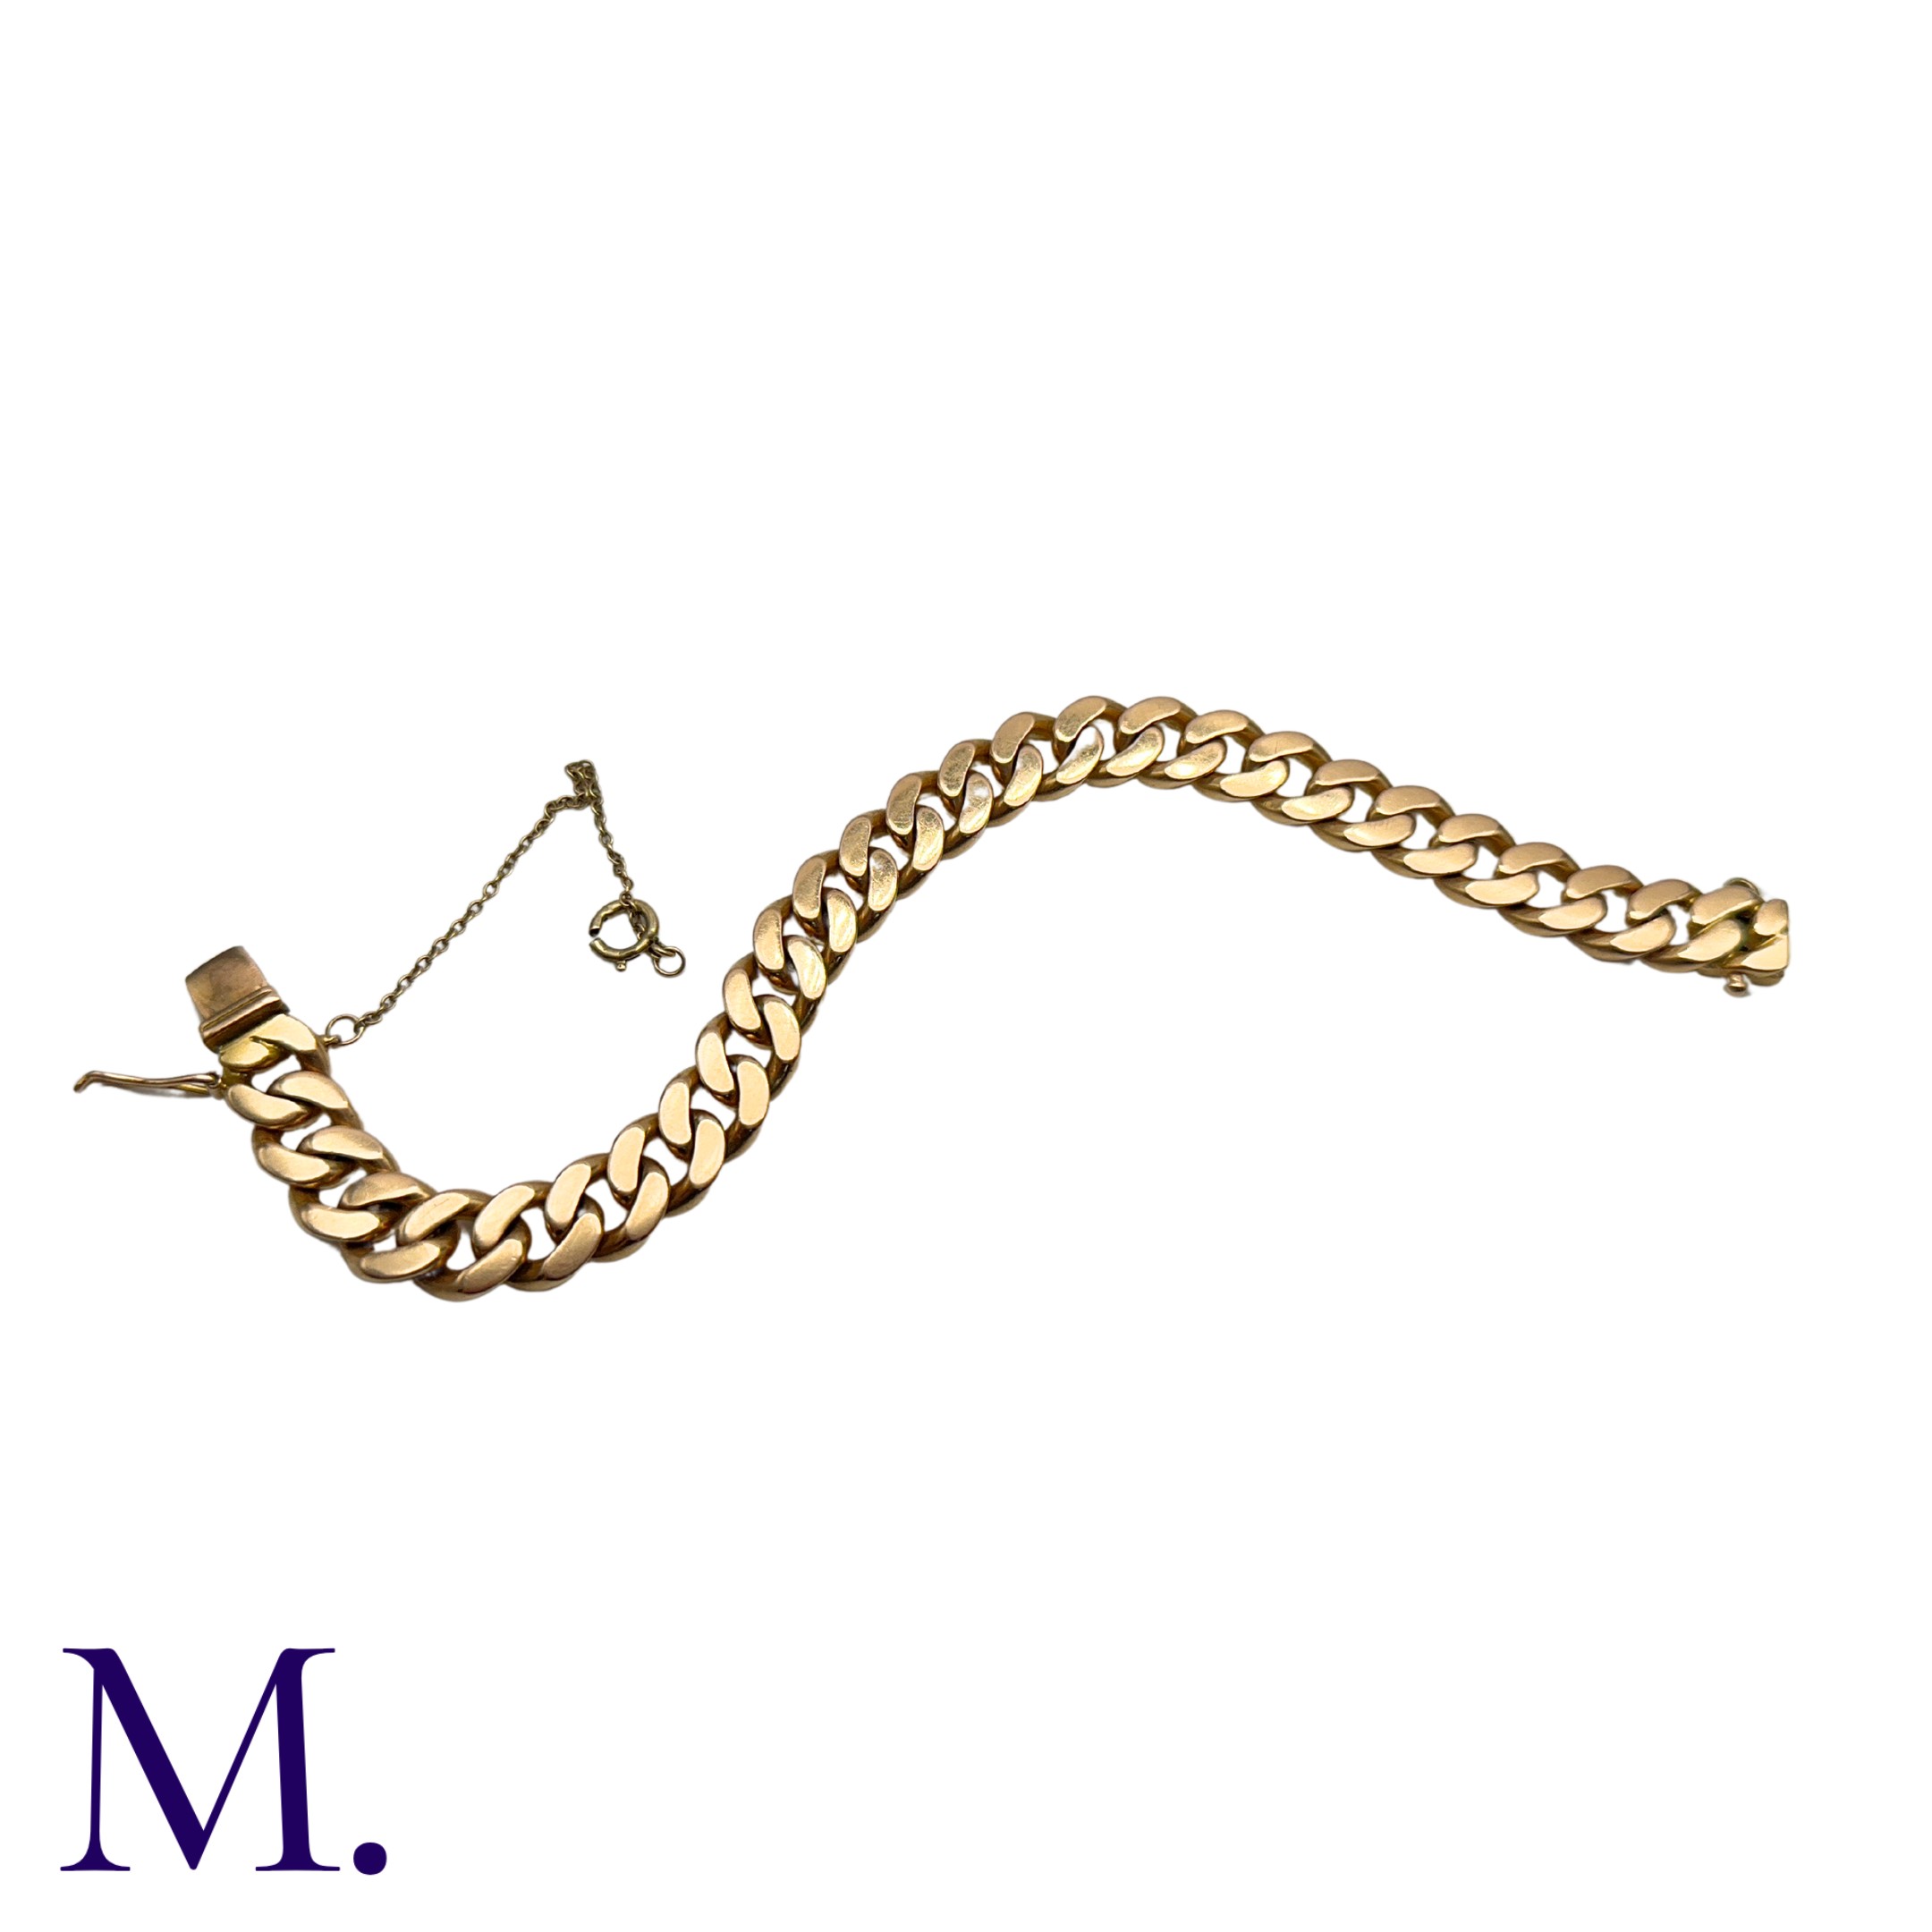 A Heavy Curb Link Bracelet in yellow gold, comprising a series of interlocking curb links. - Image 4 of 4